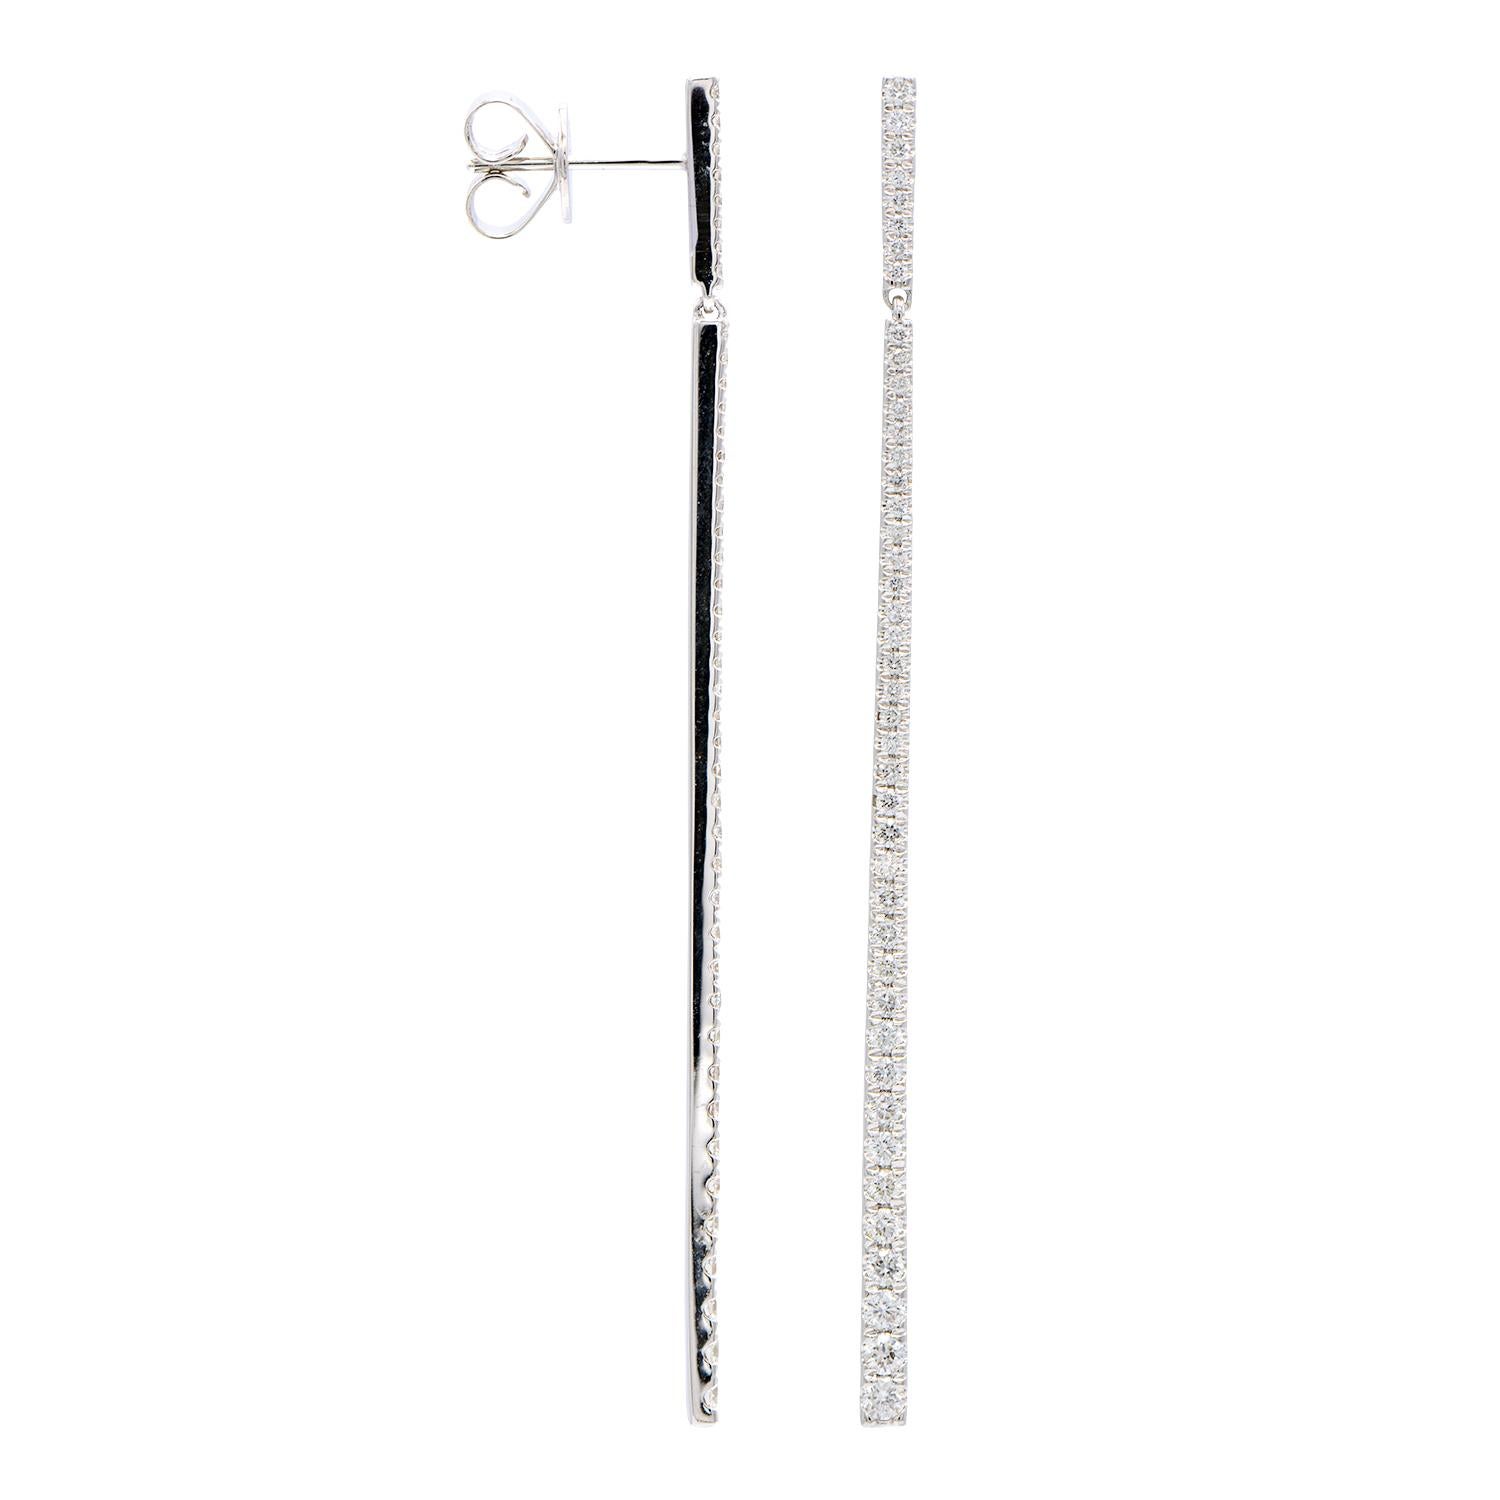 These modern and fun earrings go with everything! These hanging earrings are made from 5.0 grams of 18-karat white gold. Each earring has a secure top piece with a stud back then has a dangling long bottom piece. The diamonds are in a straight line